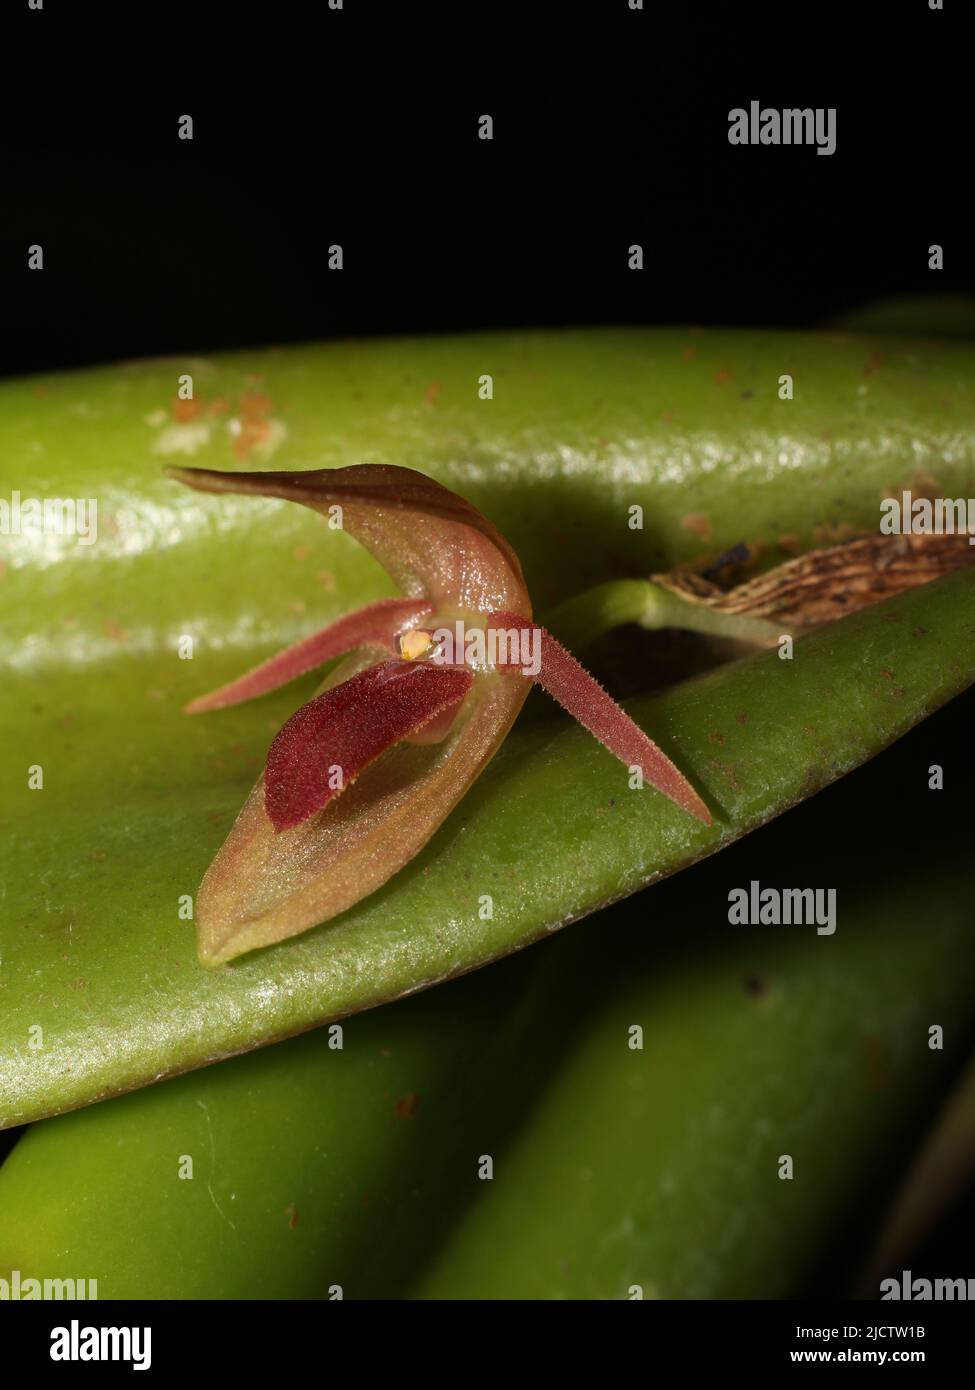 Flower of the neotropical orchid Pleurothallis grandilingua endemic to Costa Rica Stock Photo